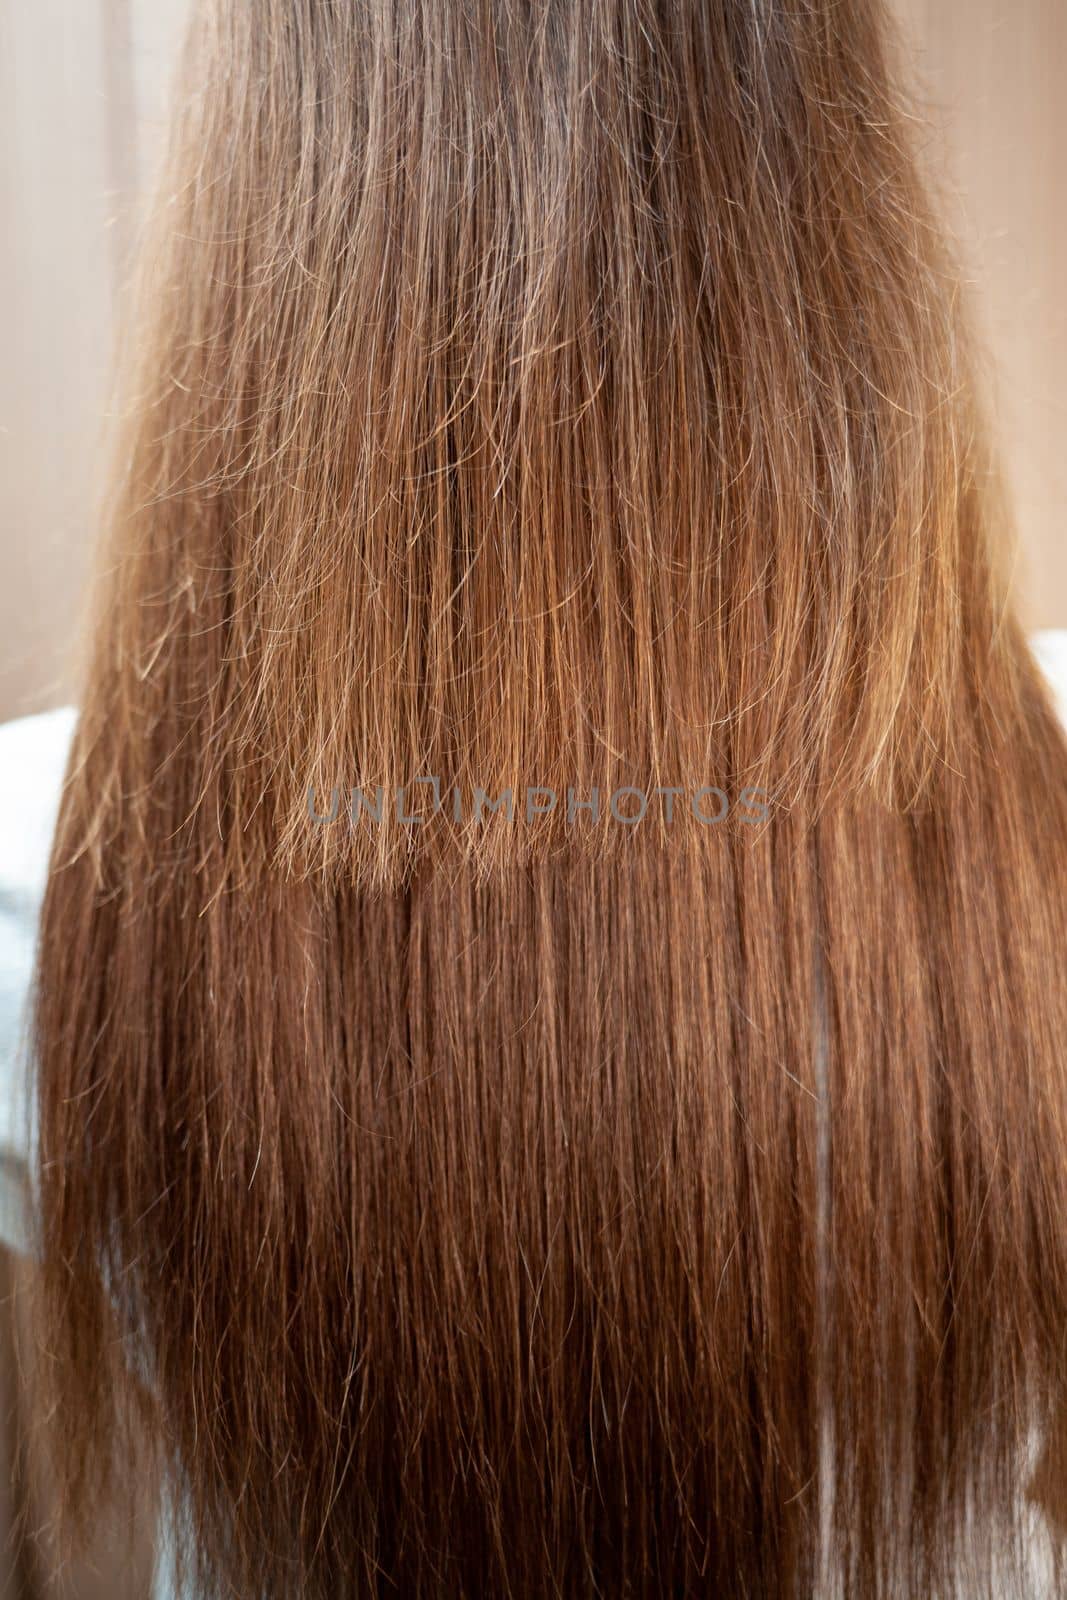 Long hair extensions and your own short ones. Hair extensions to thicken your own. The result of hair extensions